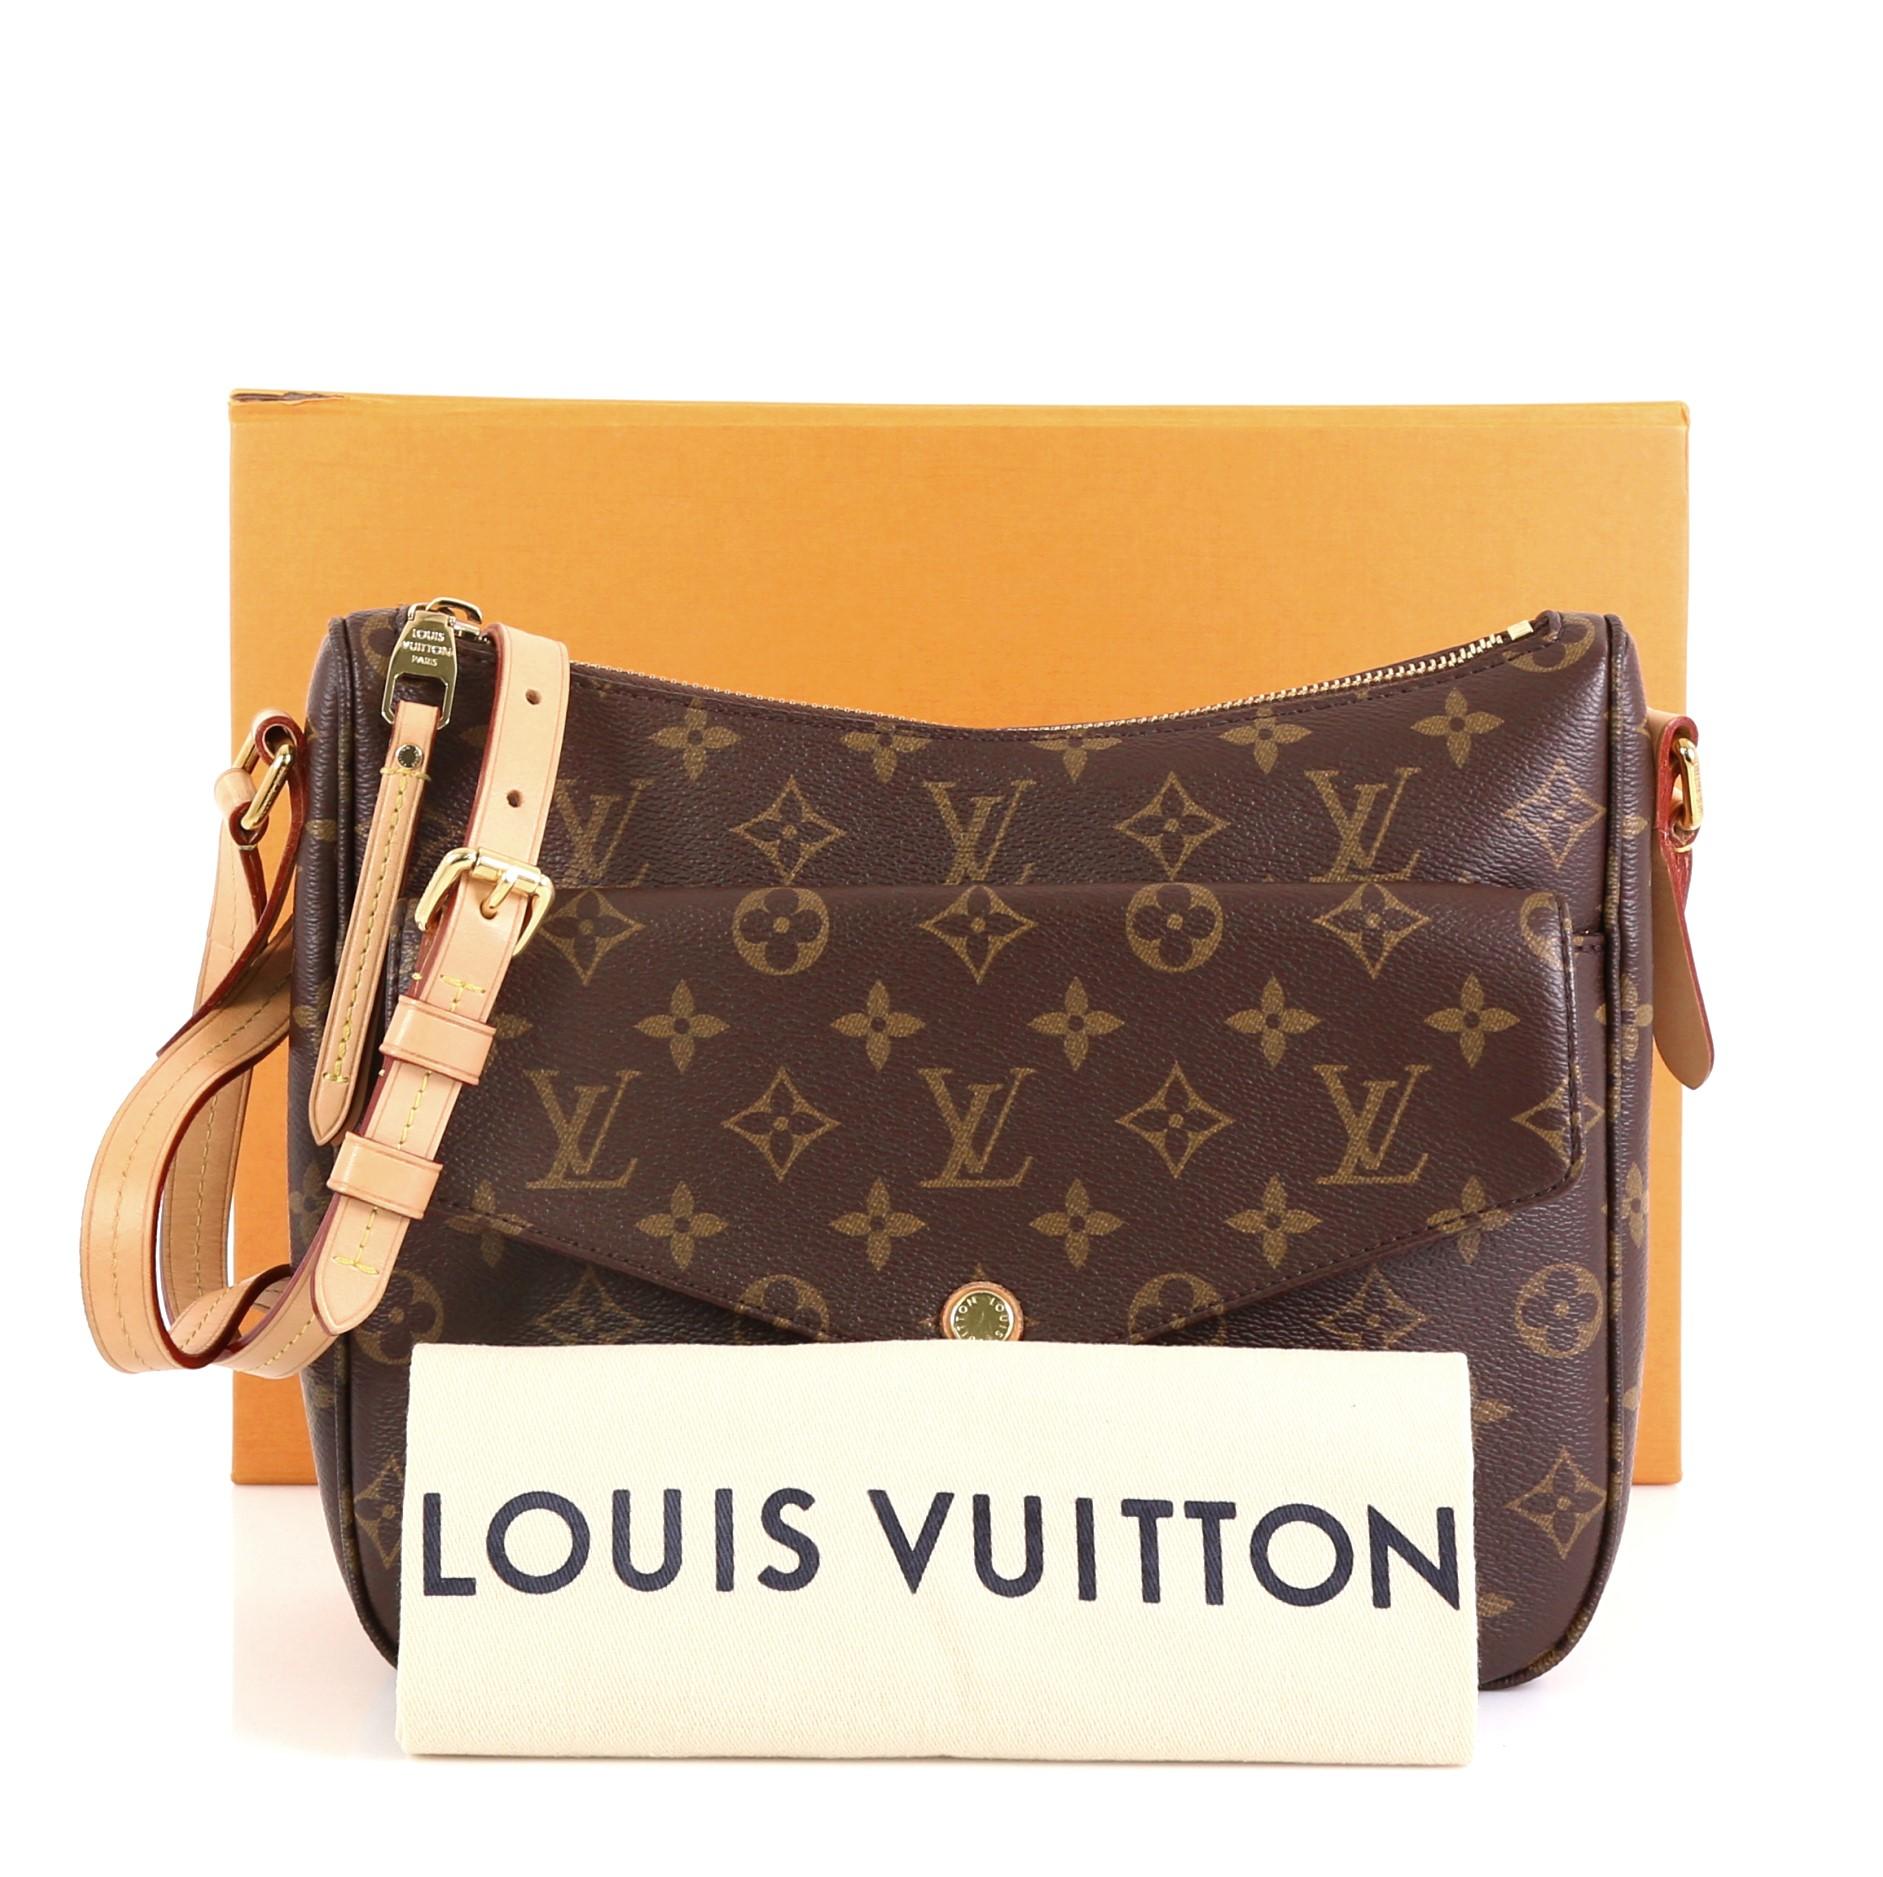 This Louis Vuitton Mabillon Shoulder Bag Monogram Canvas, crafted from brown monogram coated canvas, features an adjustable natural cowhide leather strap, exterior front snap pocket, and gold-tone hardware. Its zip closure opens to a red fabric